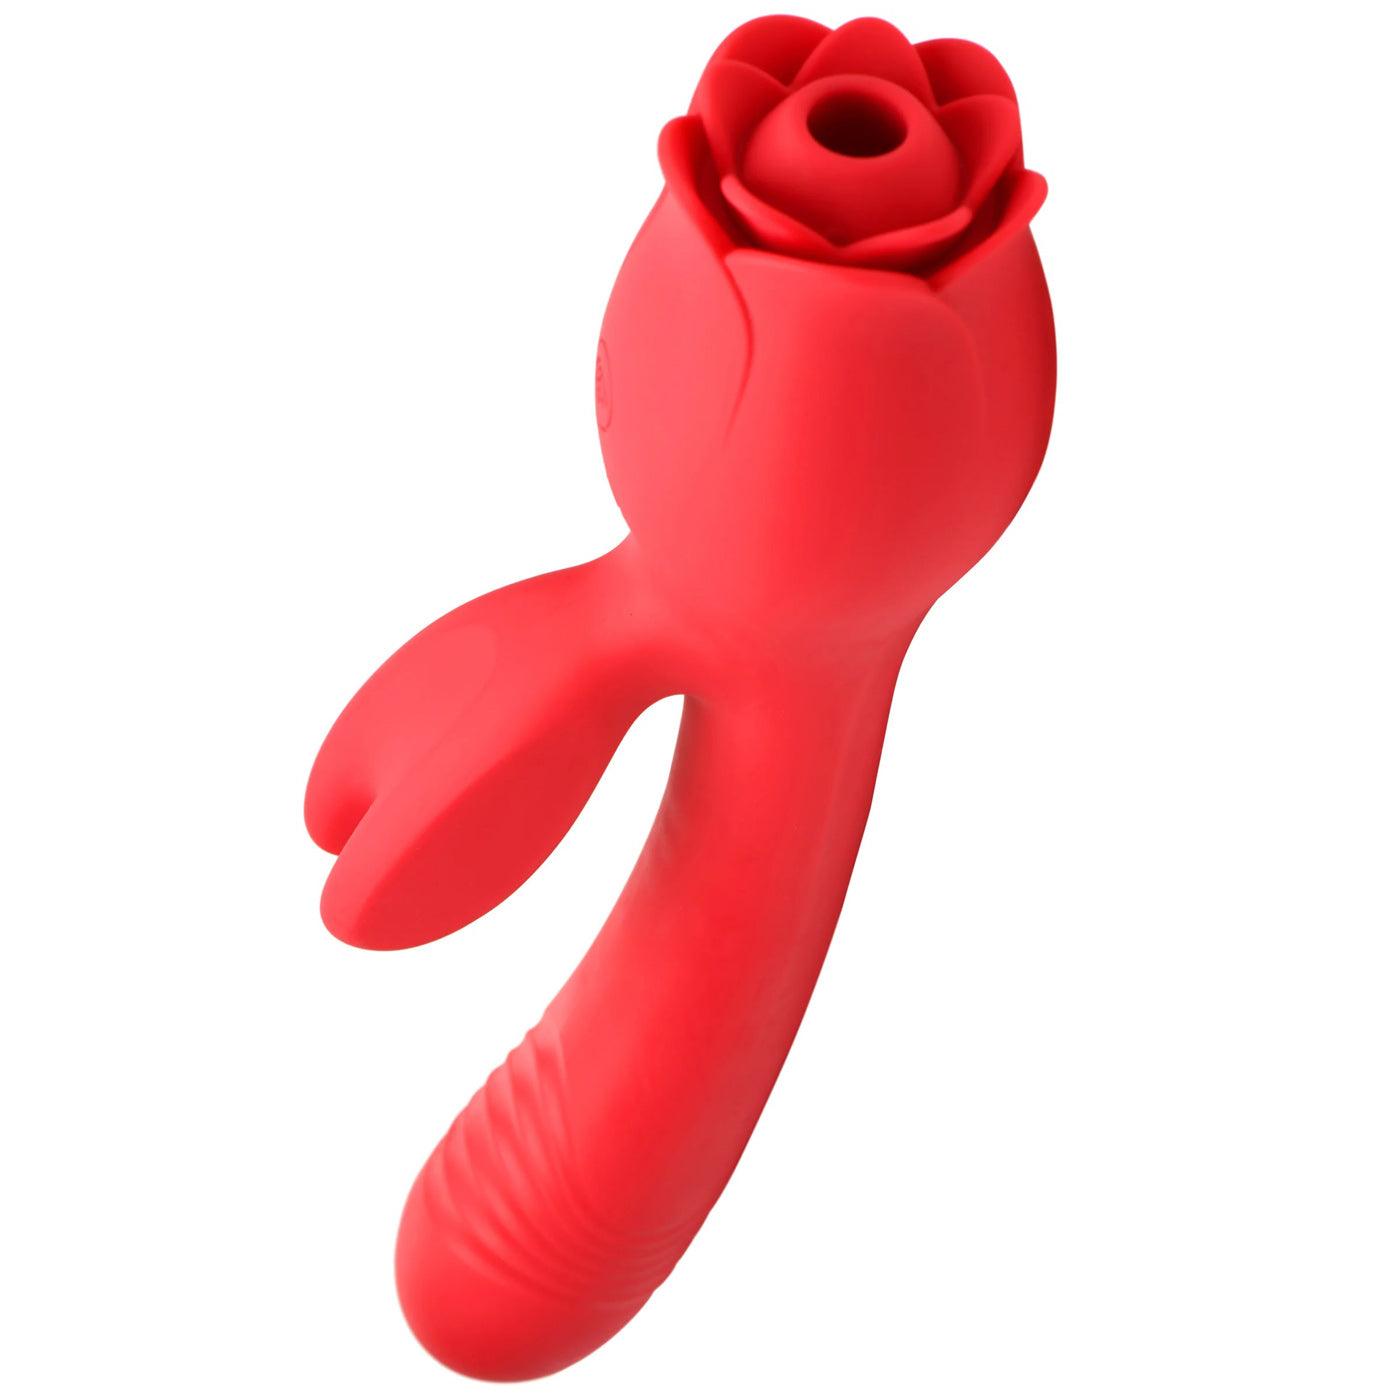 Blooming Bunny Sucking and Thrusting Silicone Rabbit Vibrator - Red - My Sex Toy Hub